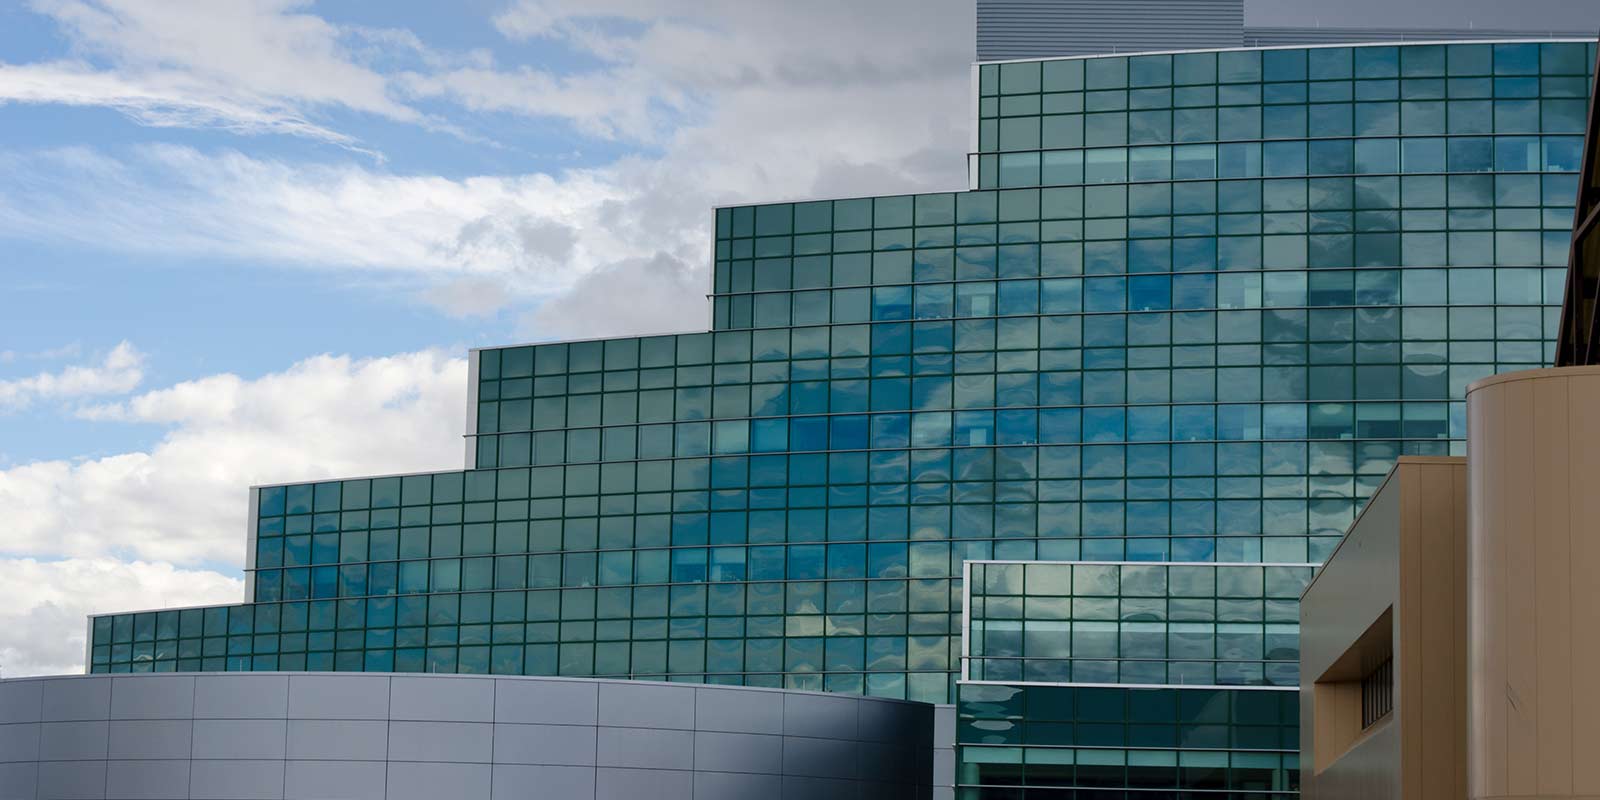 A view of the National Security Science Building at Los Alamos National Laboratory. The glass architecture of the building reflects the coming weather.